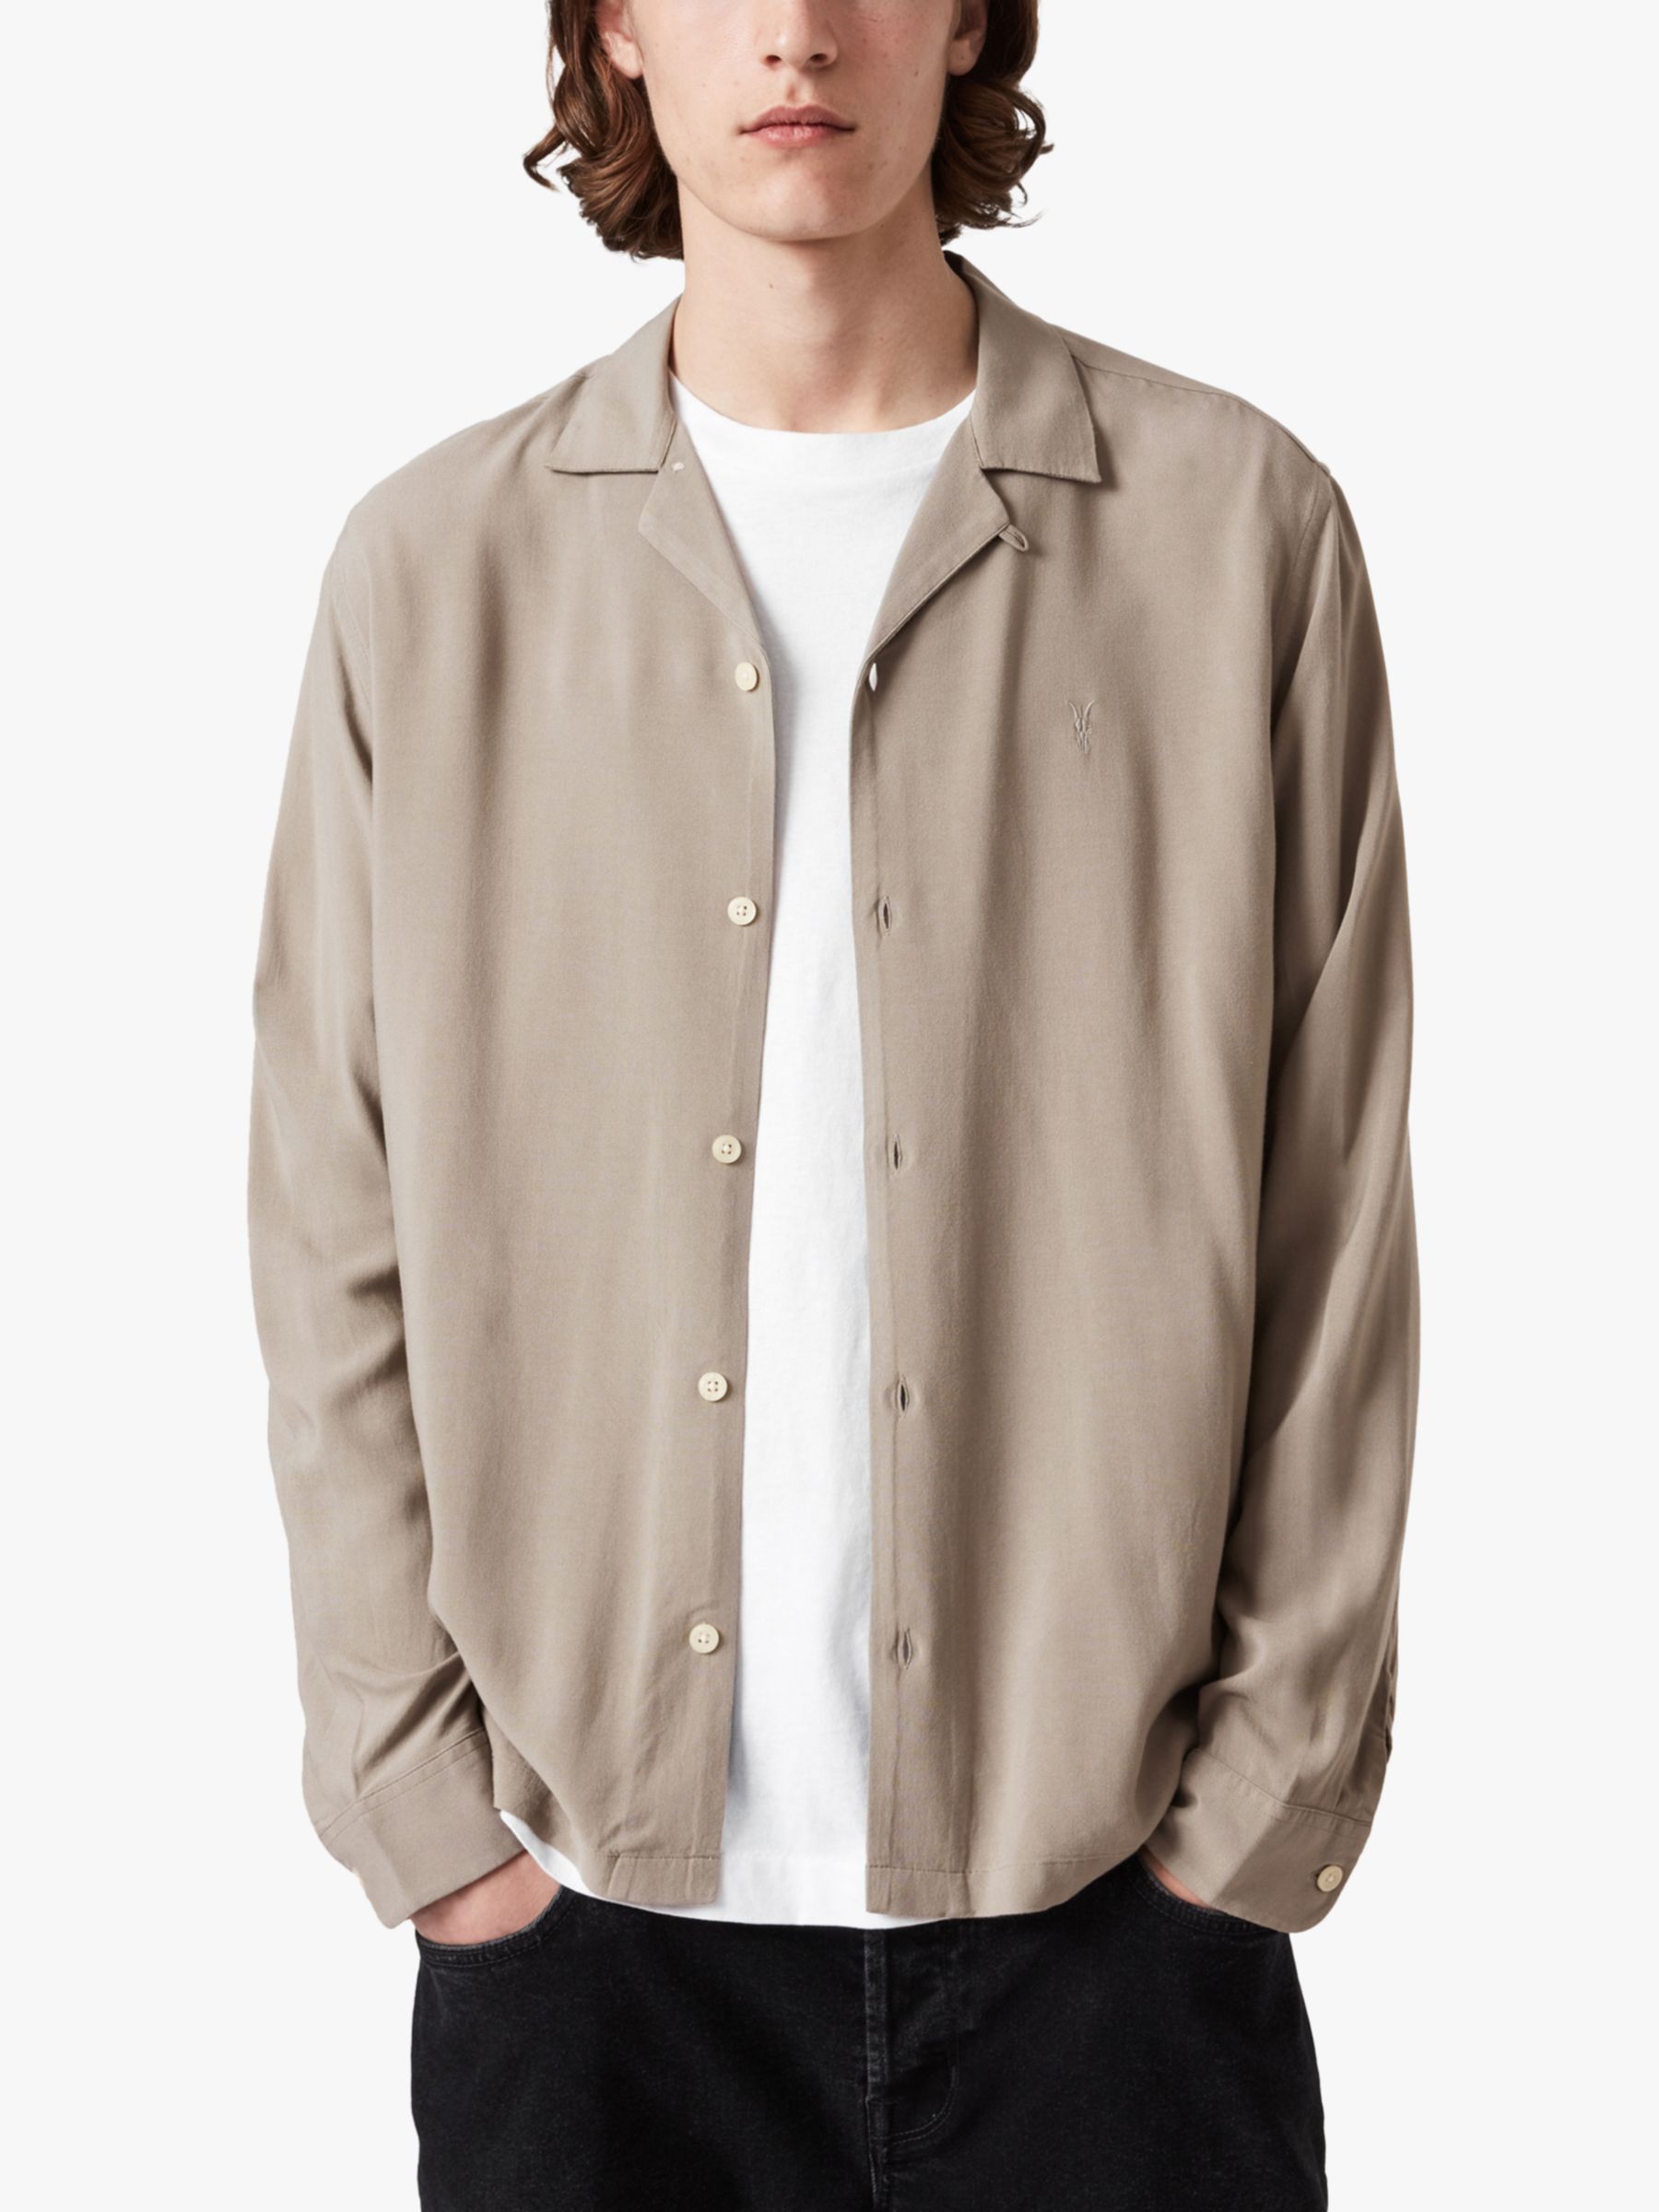 AllSaints Venice Relaxed Fit Long Sleeve Shirt, Willow Taupe